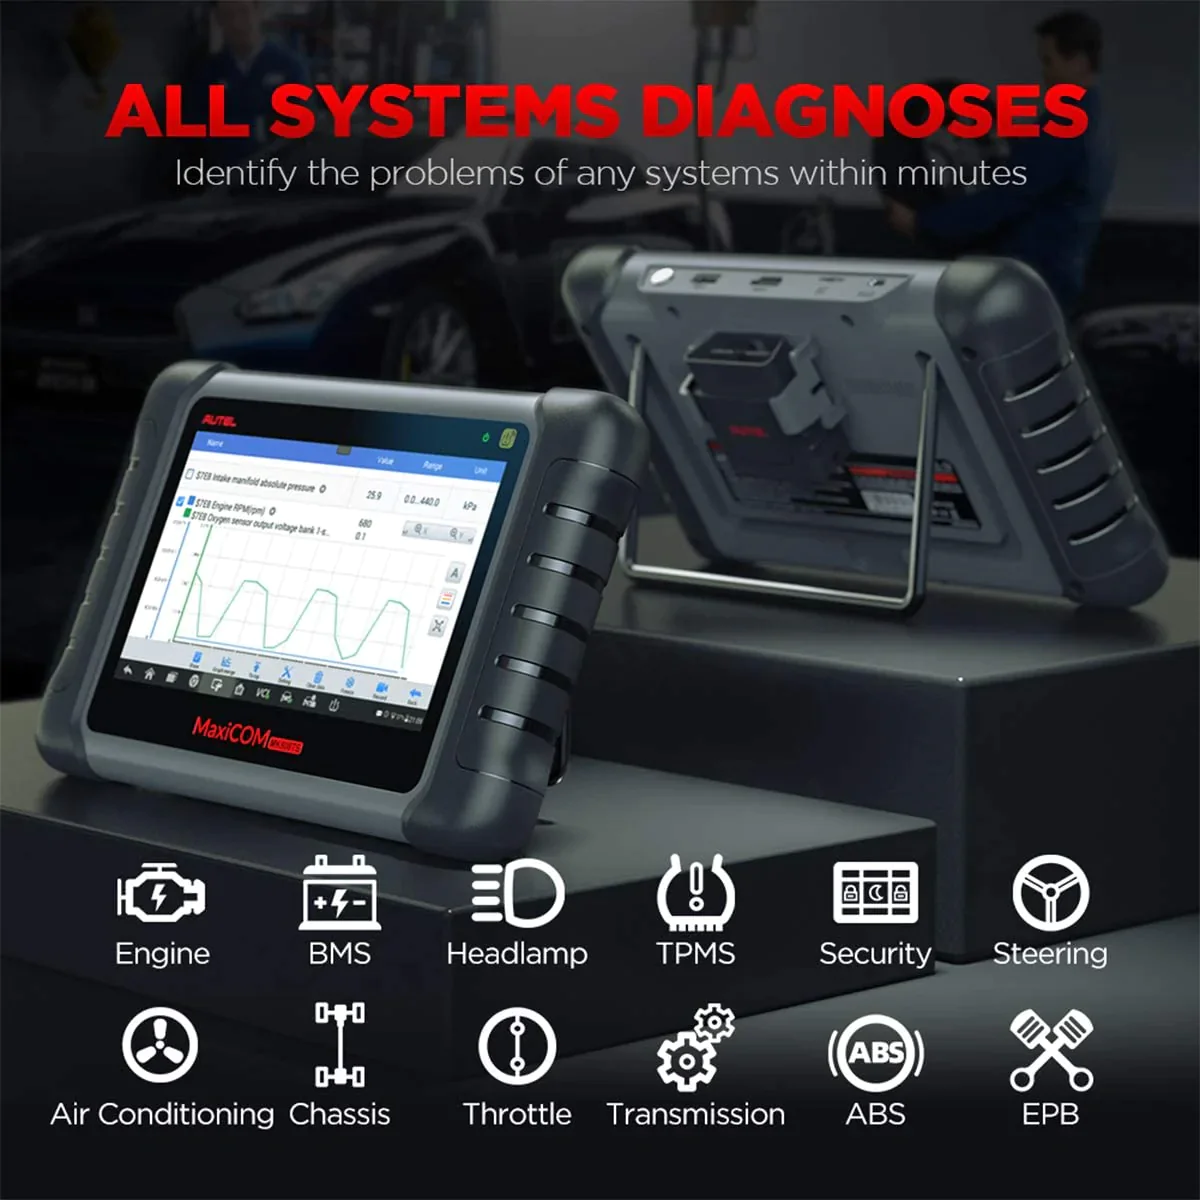 Autel MaxiCheck OBD2 Scanner Computer Diagnostic Tool Mechanic Must Have Clear Engine Codes